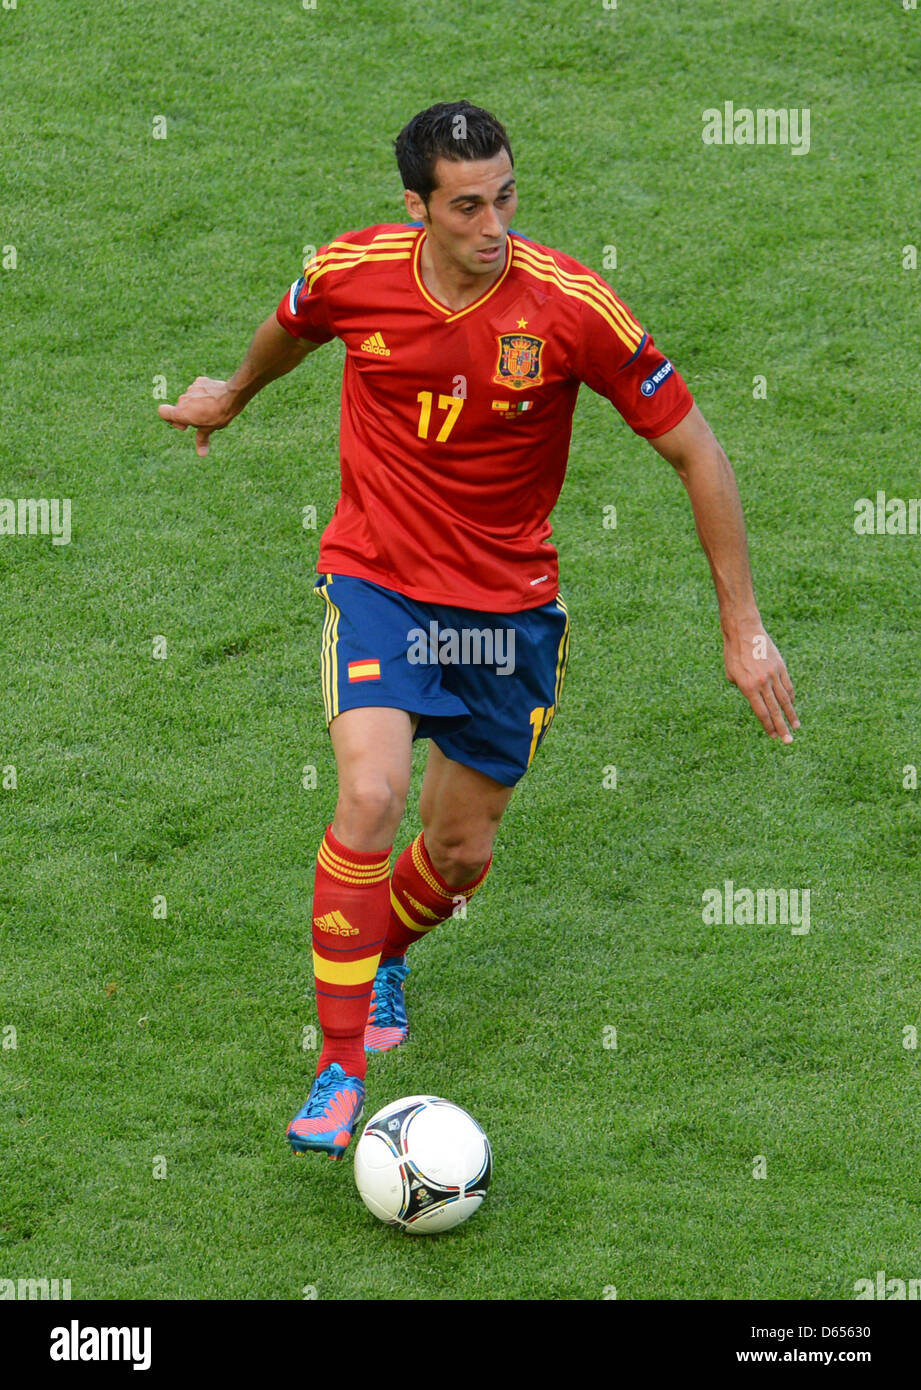 Spain's Alvaro Arbeloa runs with the ball during UEFA EURO 2012 group C soccer match Spain vs Italy at Arena Gdansk in Gdansk, Poland, 10 June 2012. Photo: Andreas Gebert dpa (Please refer to chapters 7 and 8 of http://dpaq.de/Ziovh for UEFA Euro 2012 Terms & Conditions) Stock Photo